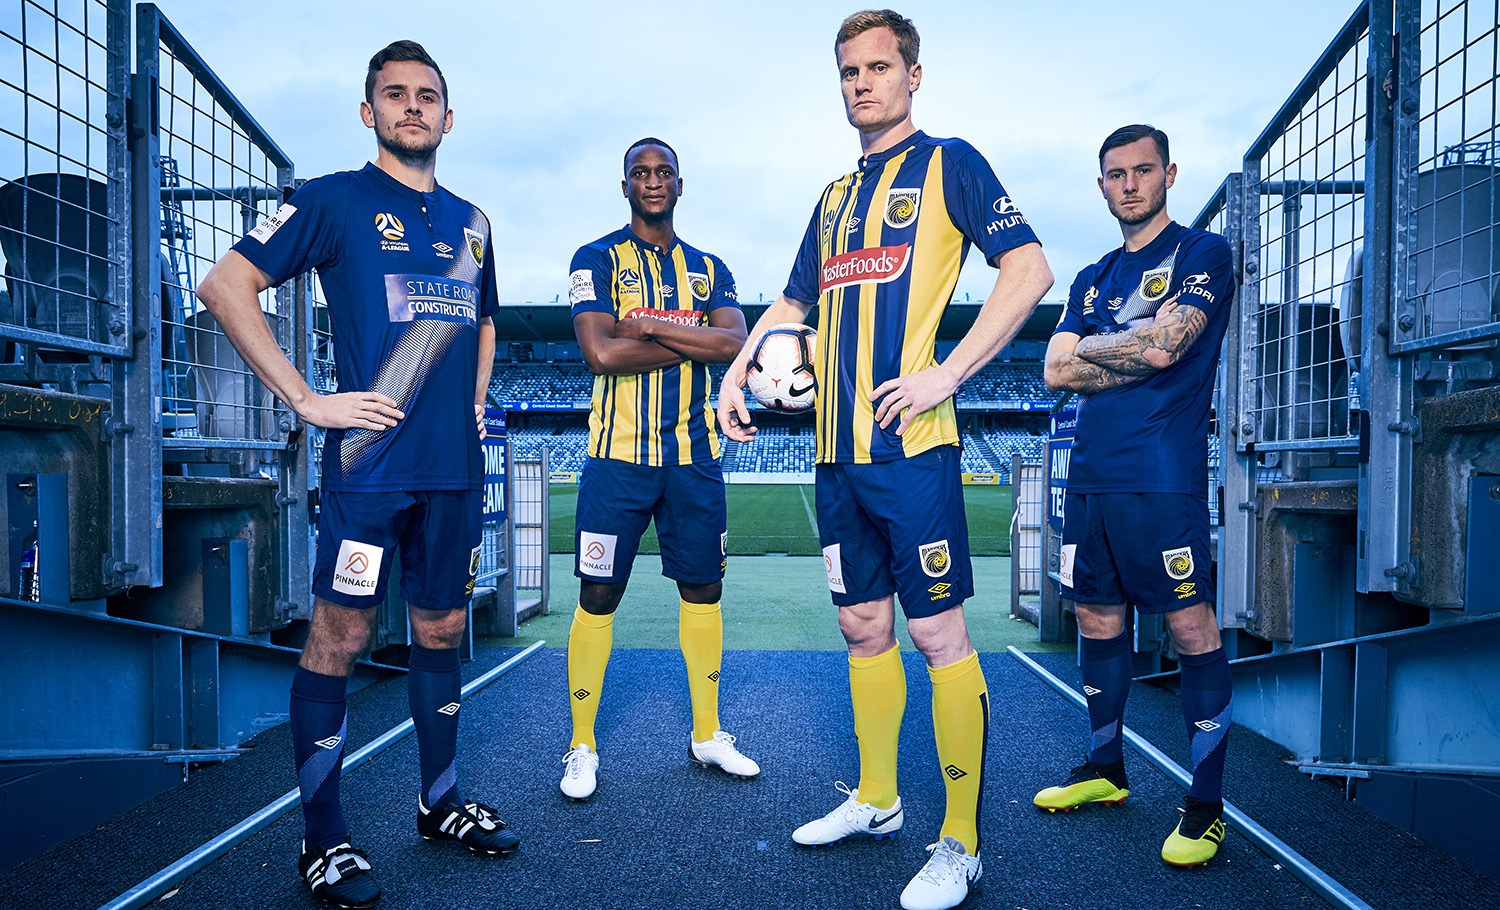 Central Coast Reveal Their Questionable 2018/19 Home Kit